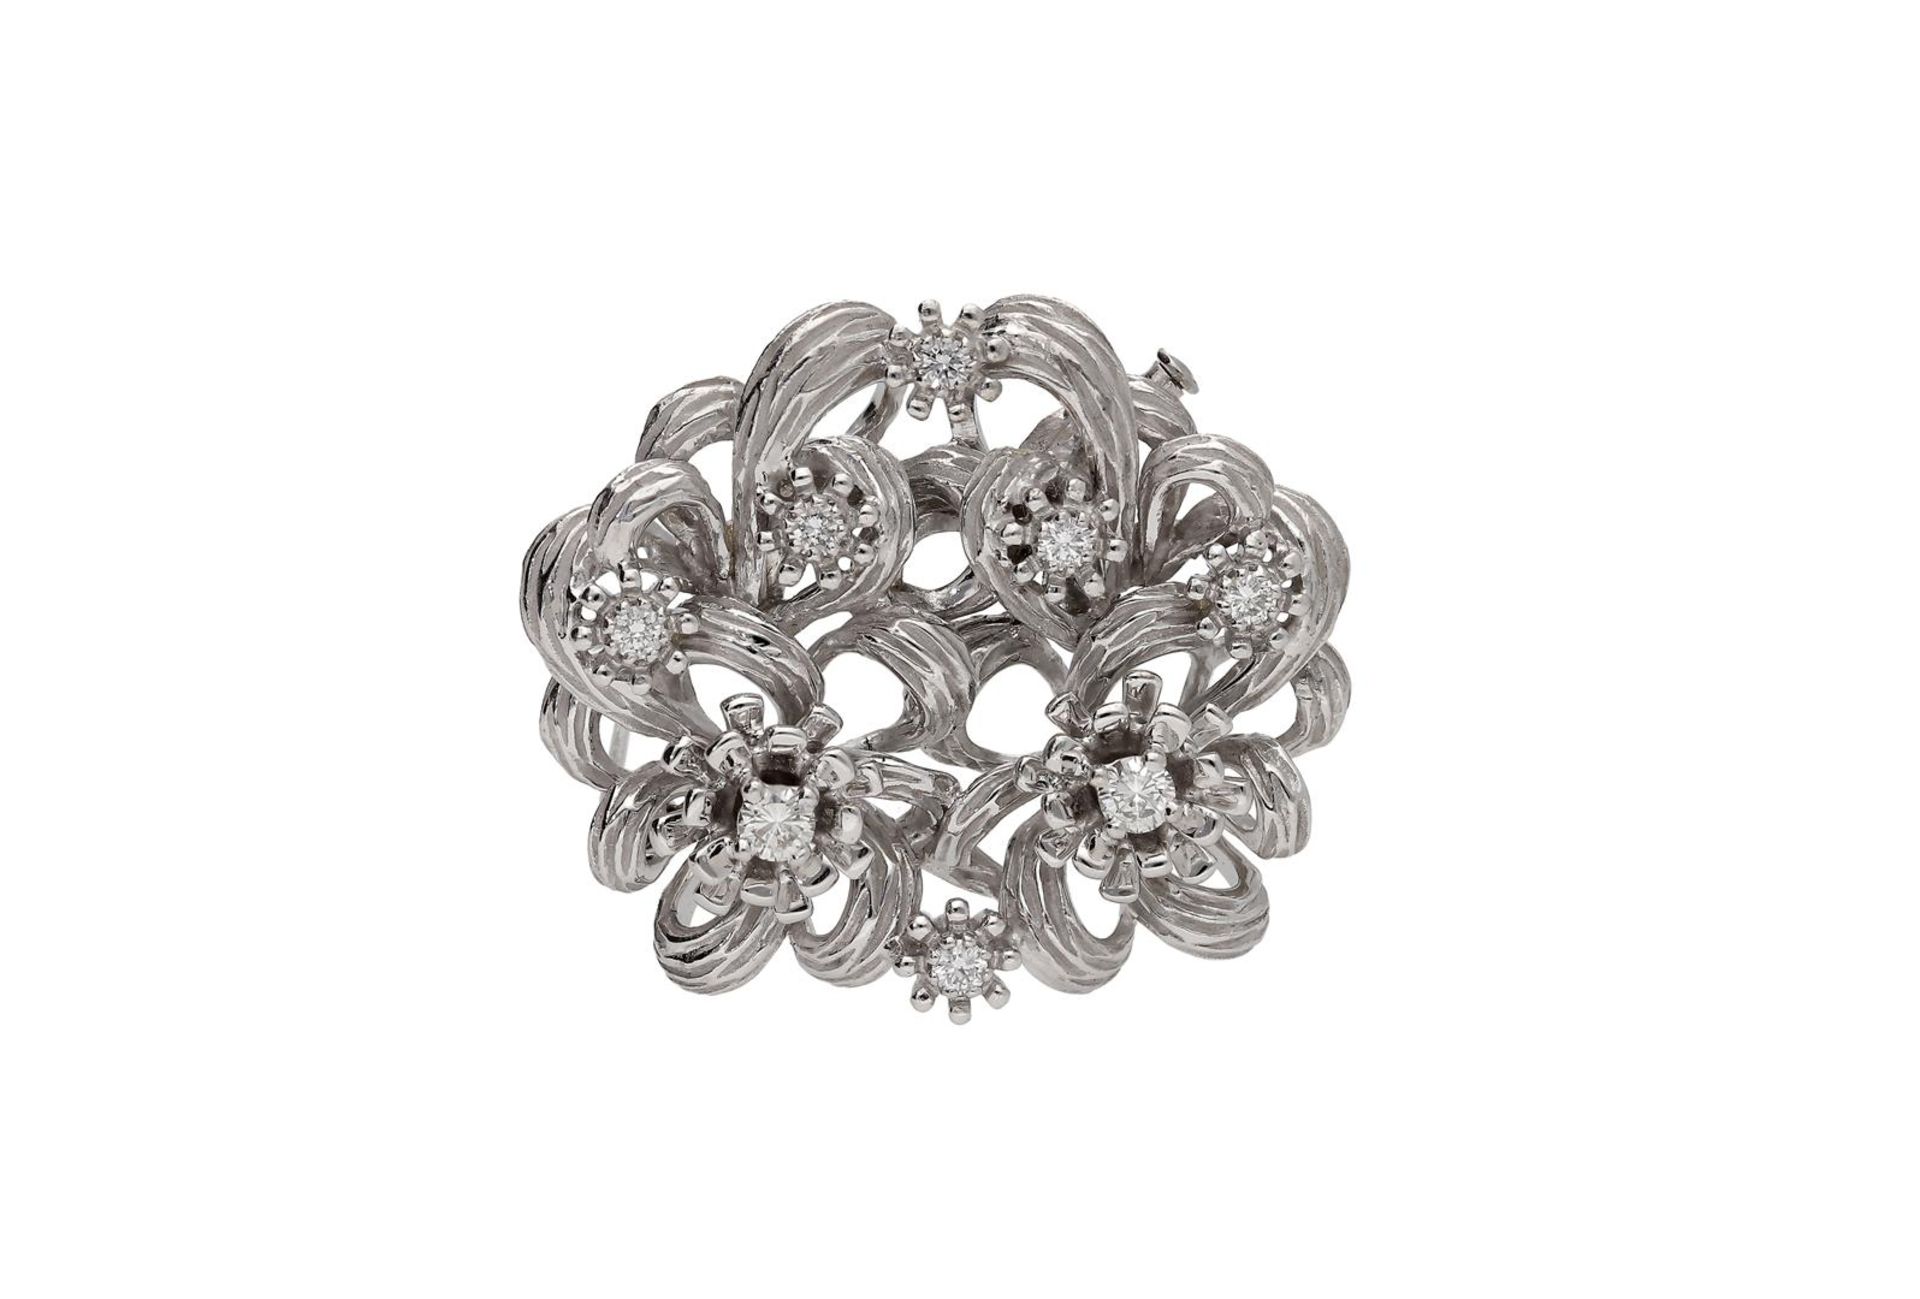 An 18-kt. white gold infinity knot brooch, set with eight brilliant cut diamonds, in total ca. 0.8 c